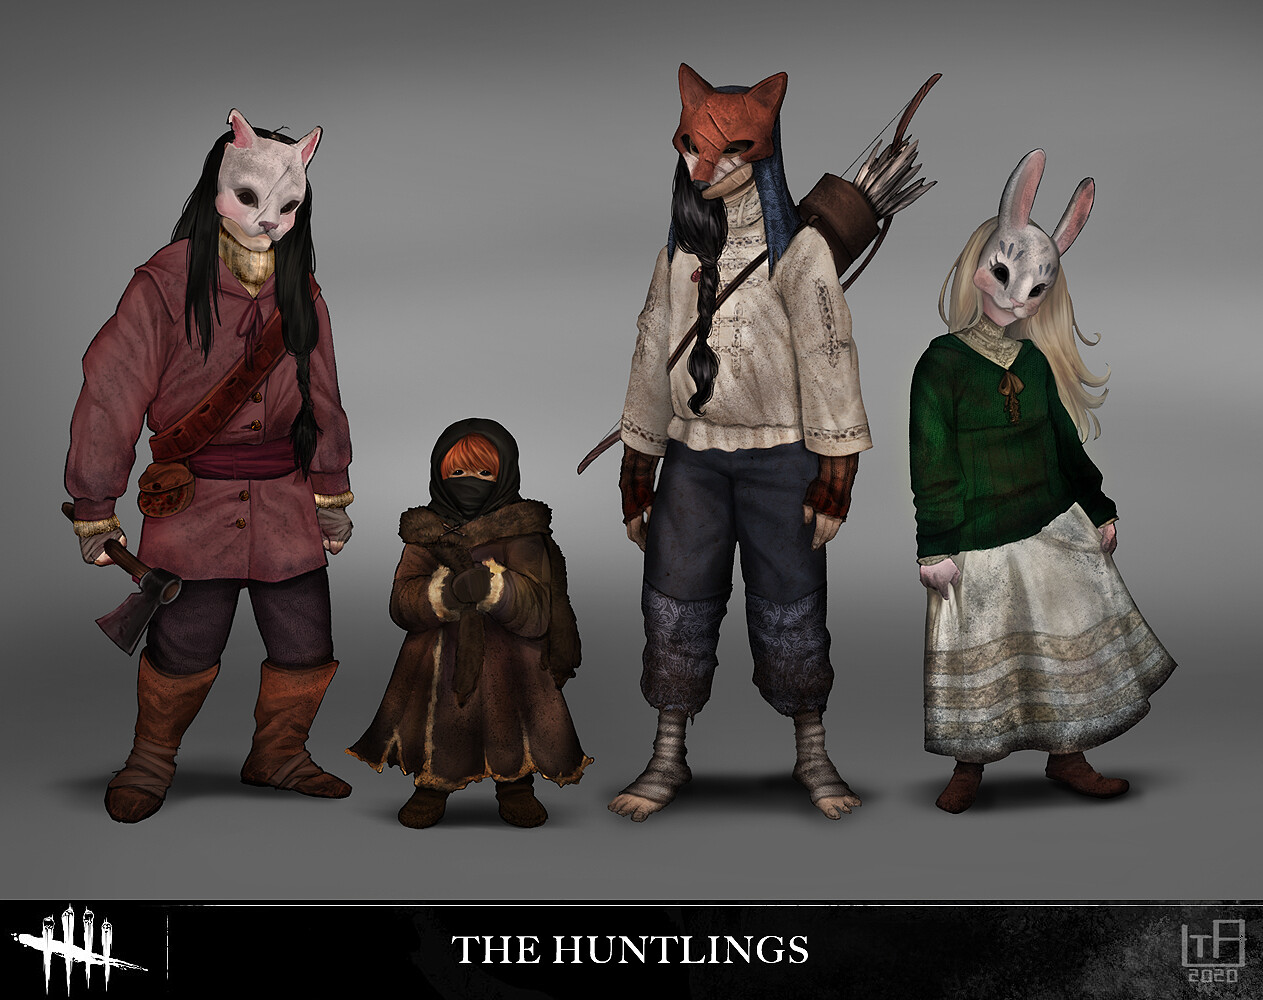 An alternate universe I thought about where the Huntress was able to care f...